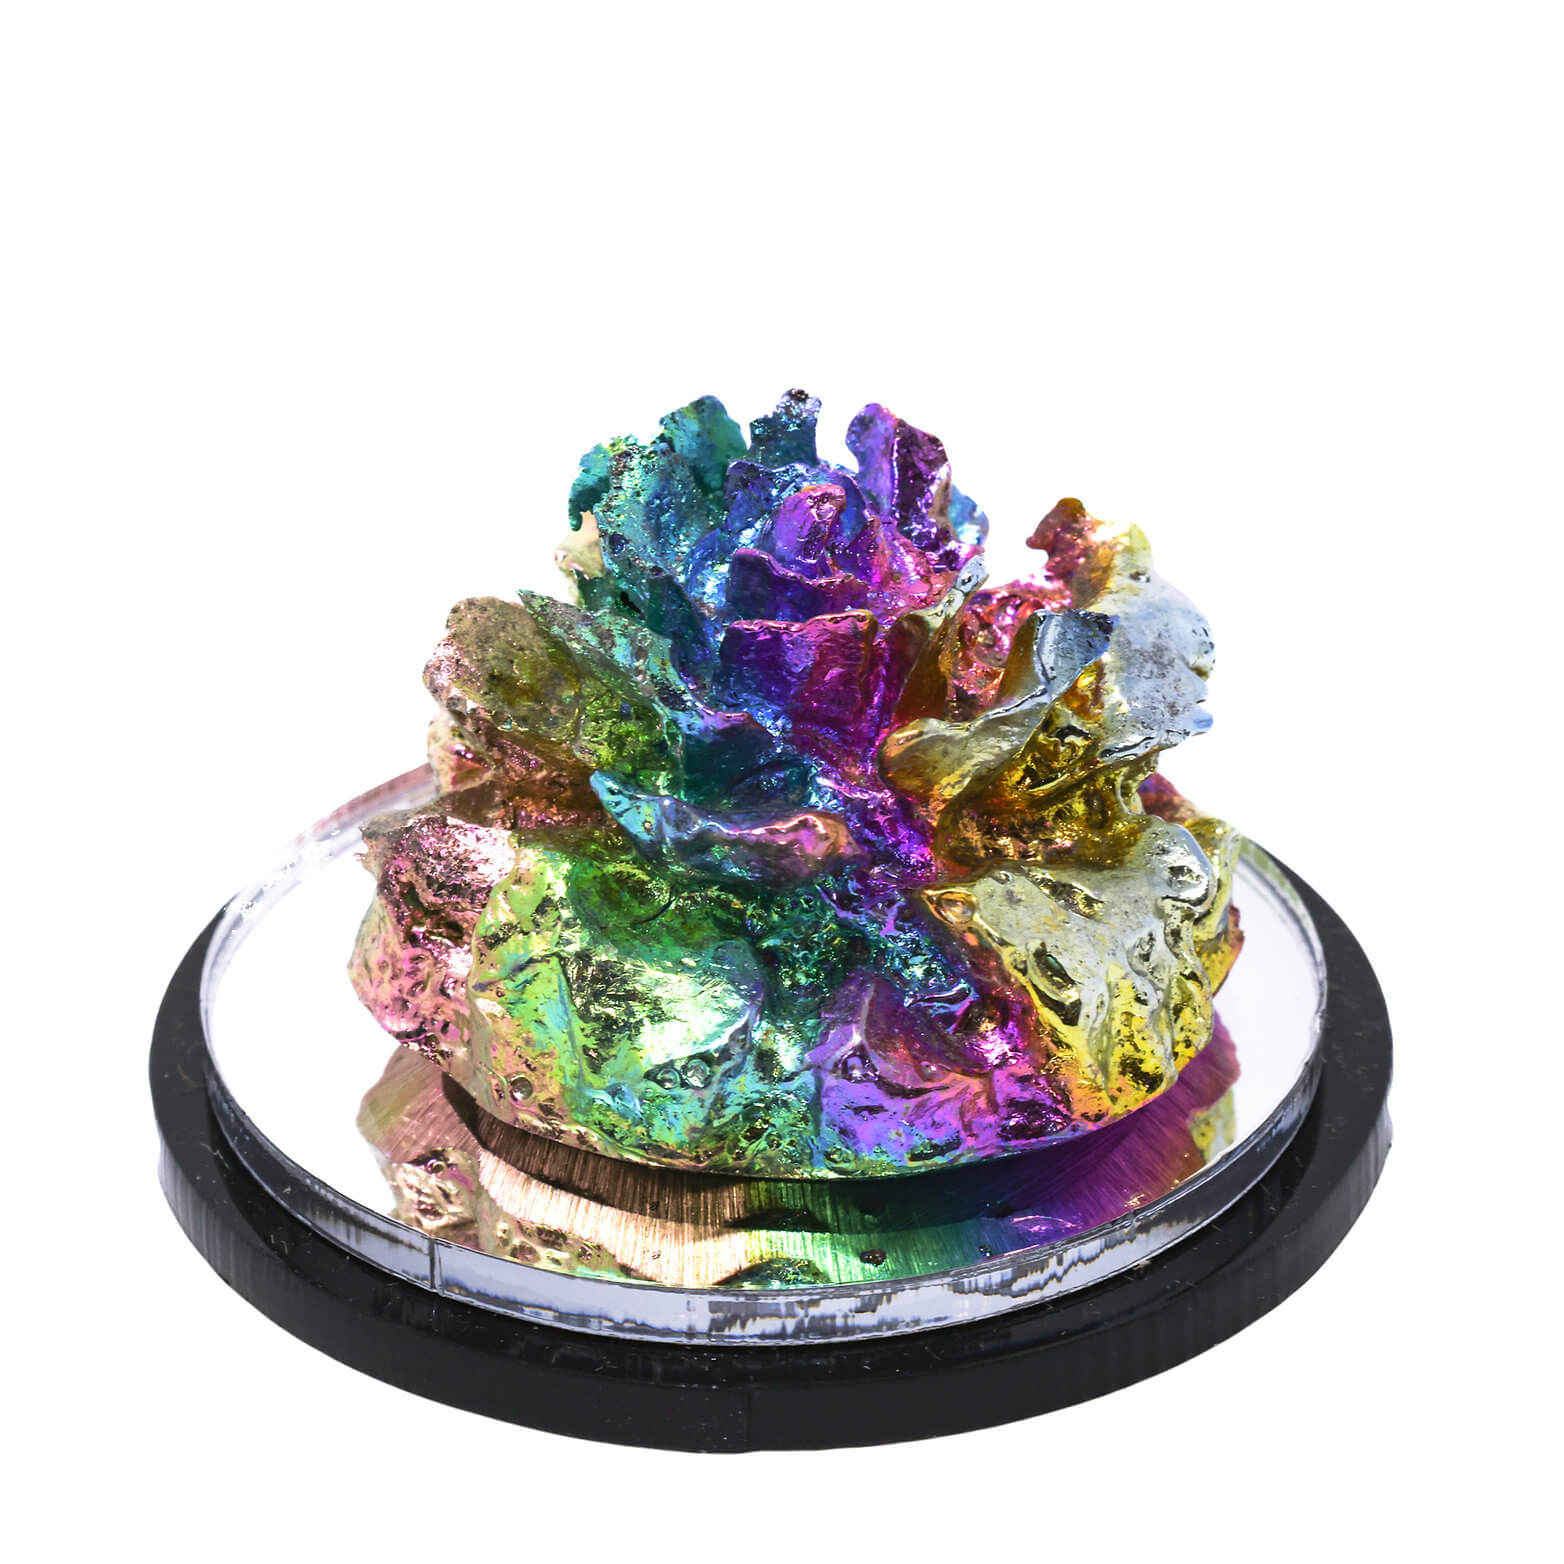 Rainbow Bismuth Crystal Flowers, Small and Large, Made by the Bismuth Smith  